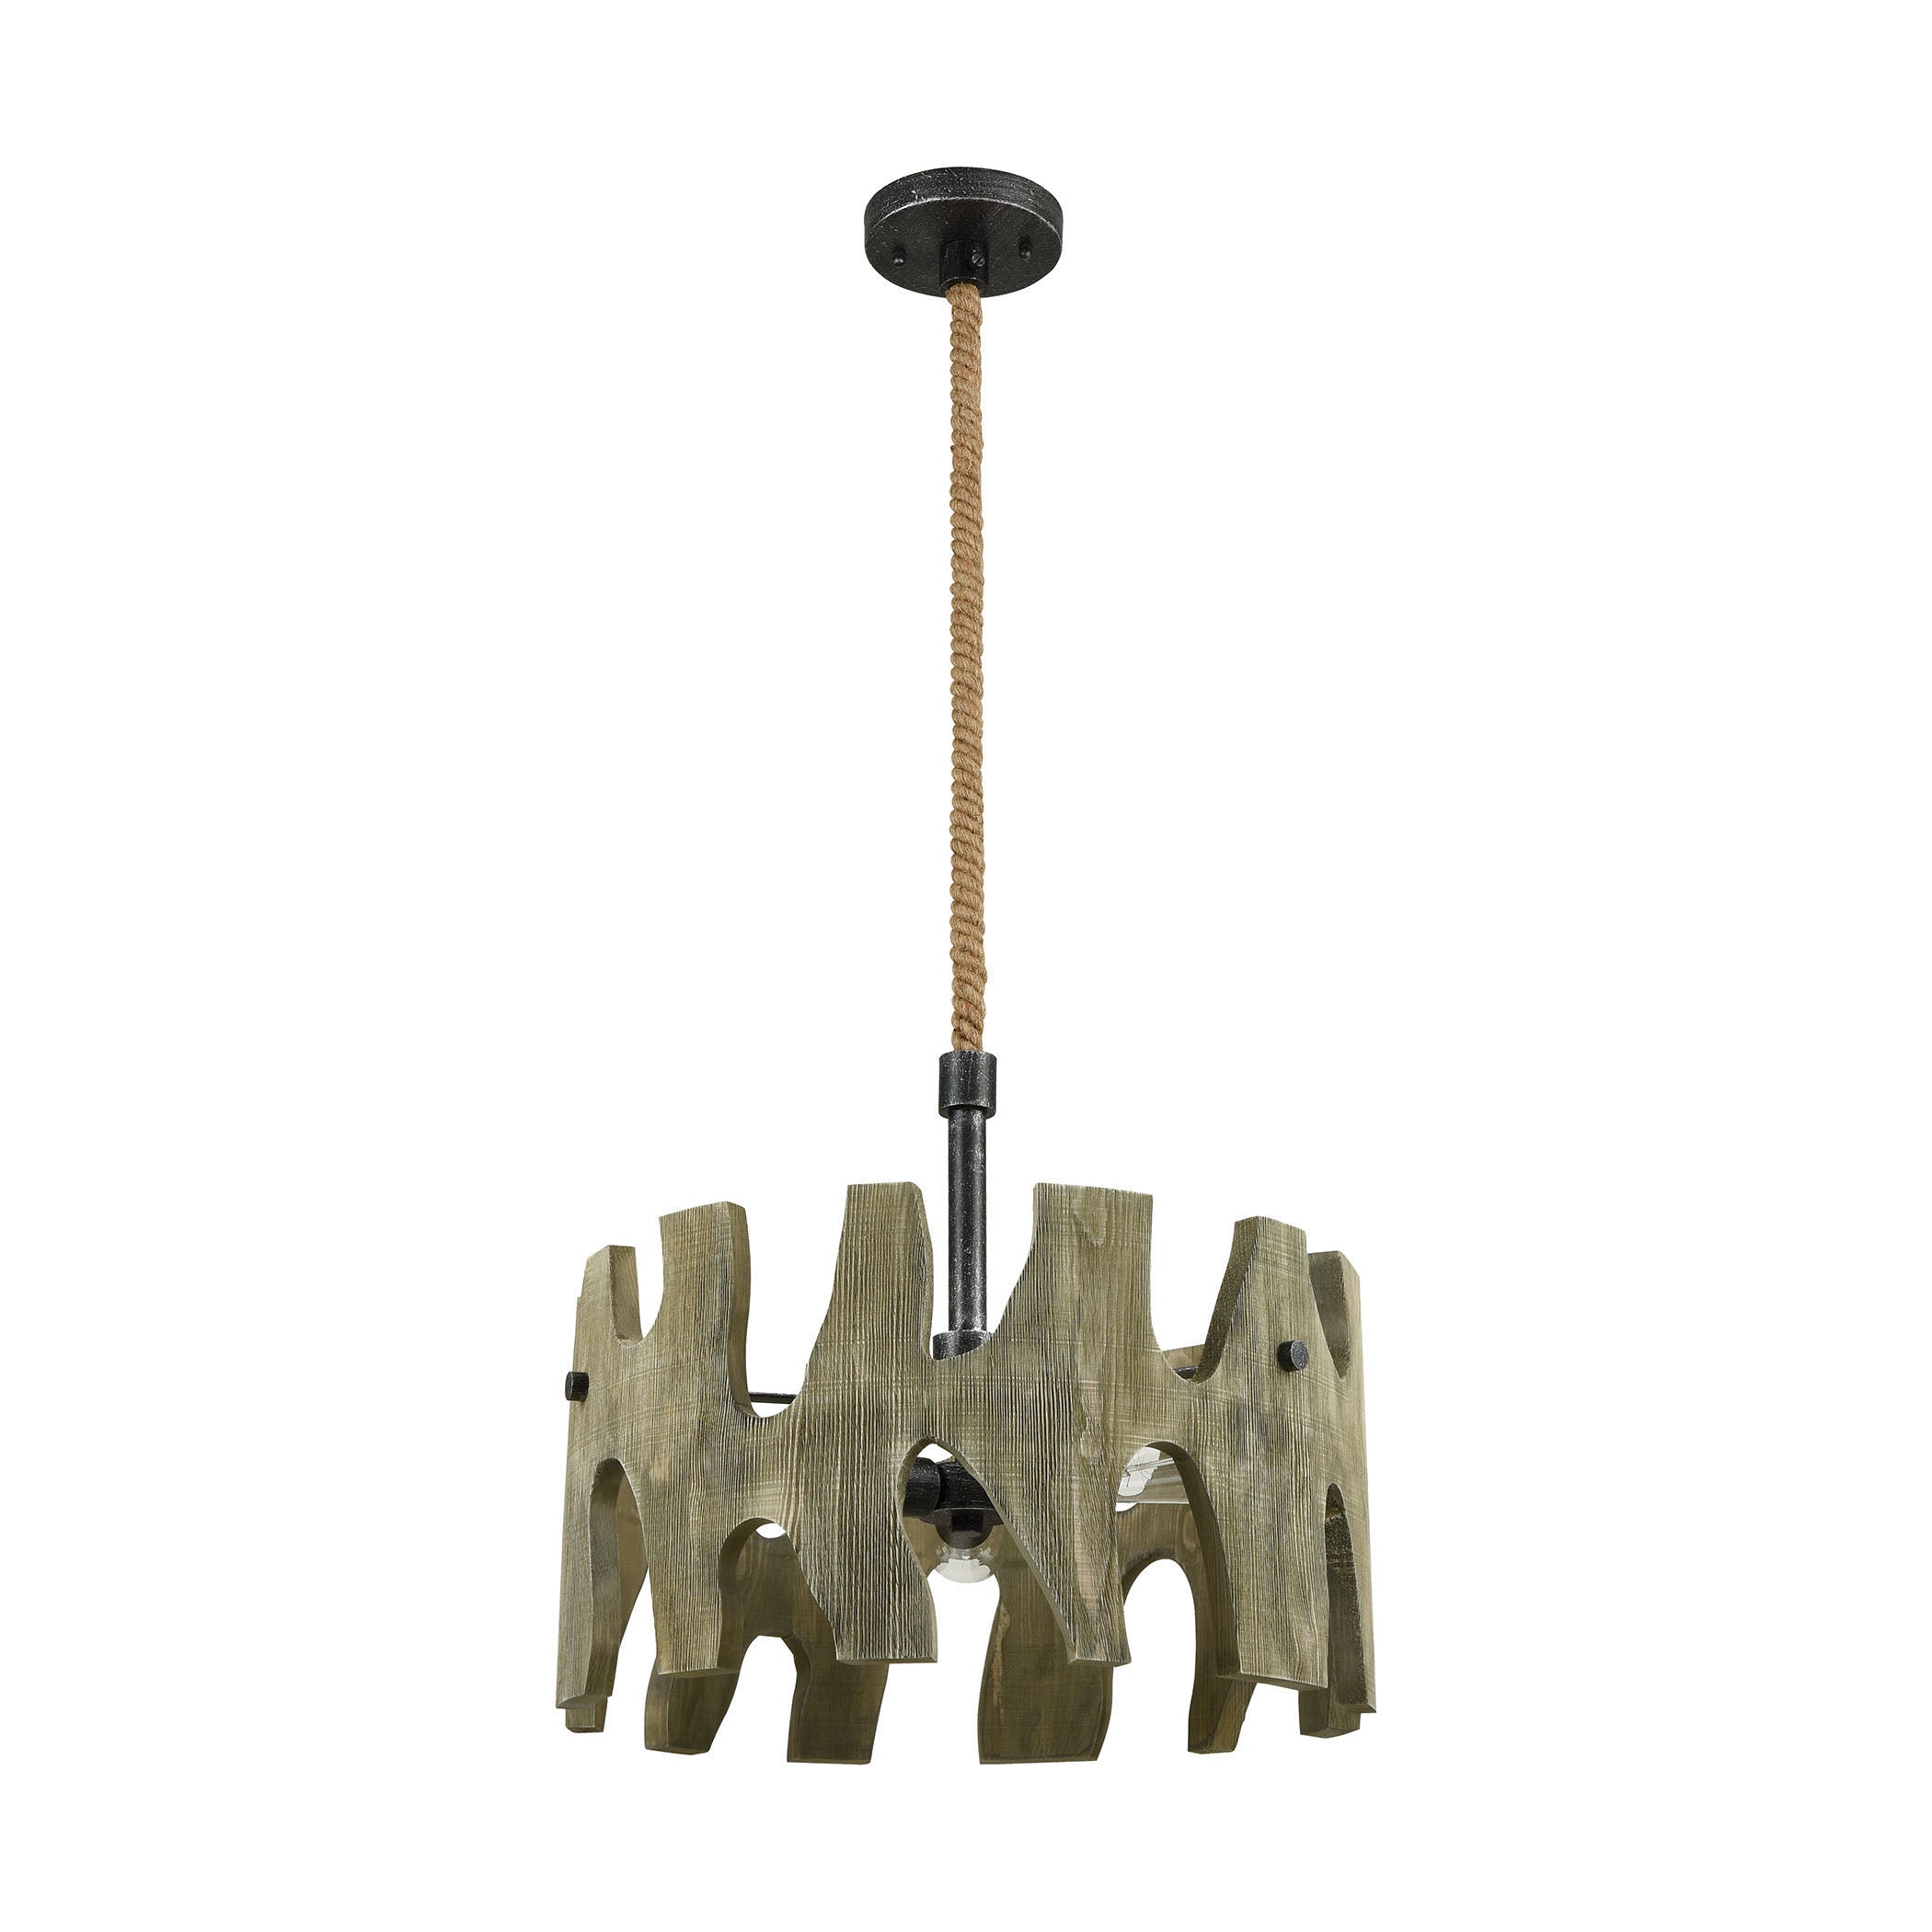 ELK Lighting 33154/3 Driftwood Cove 3-Light Chandelier in Silvered Graphite with Washed Wood Shade